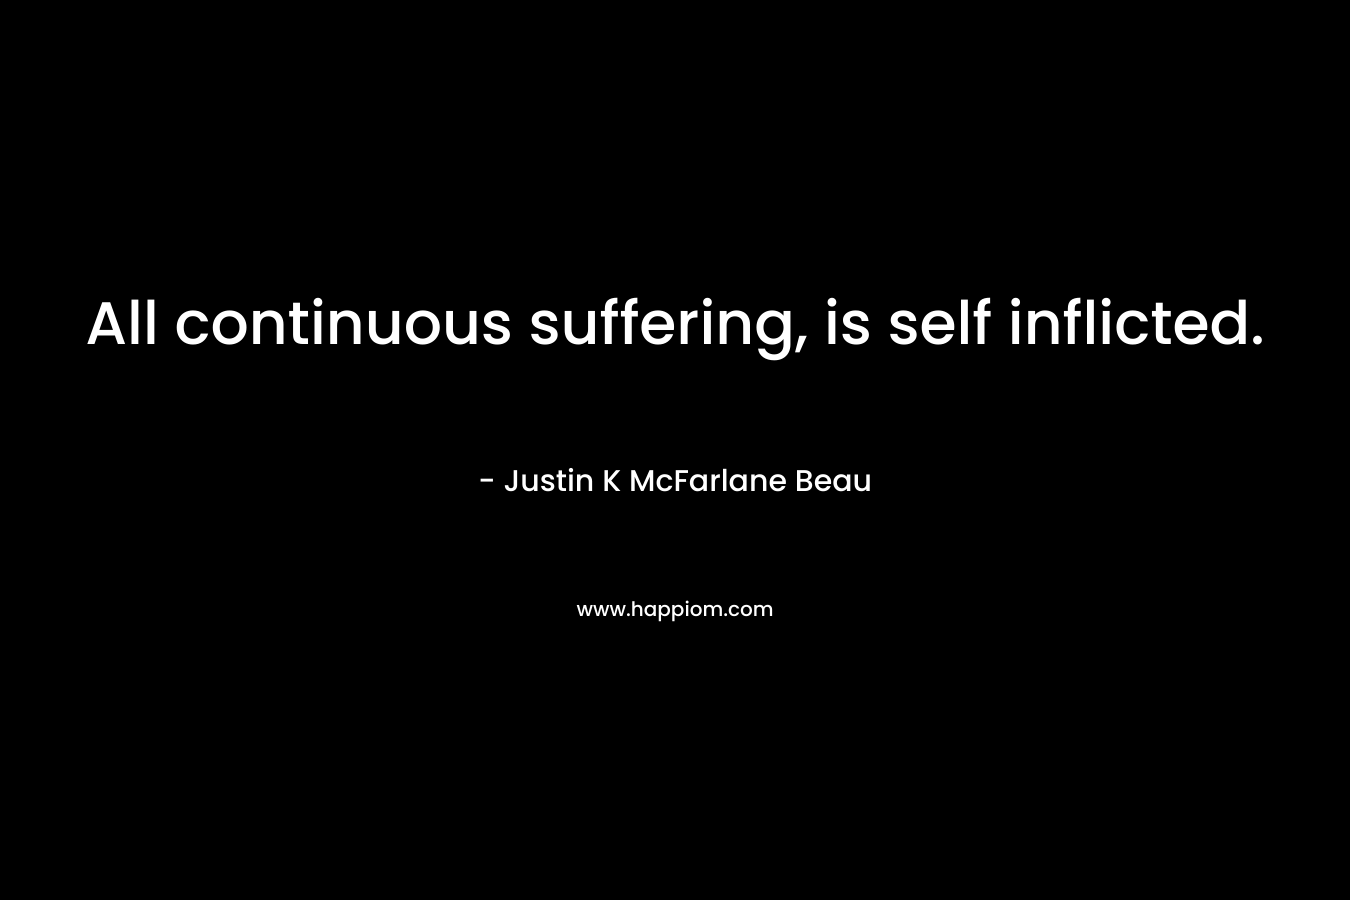 All continuous suffering, is self inflicted. – Justin K McFarlane Beau